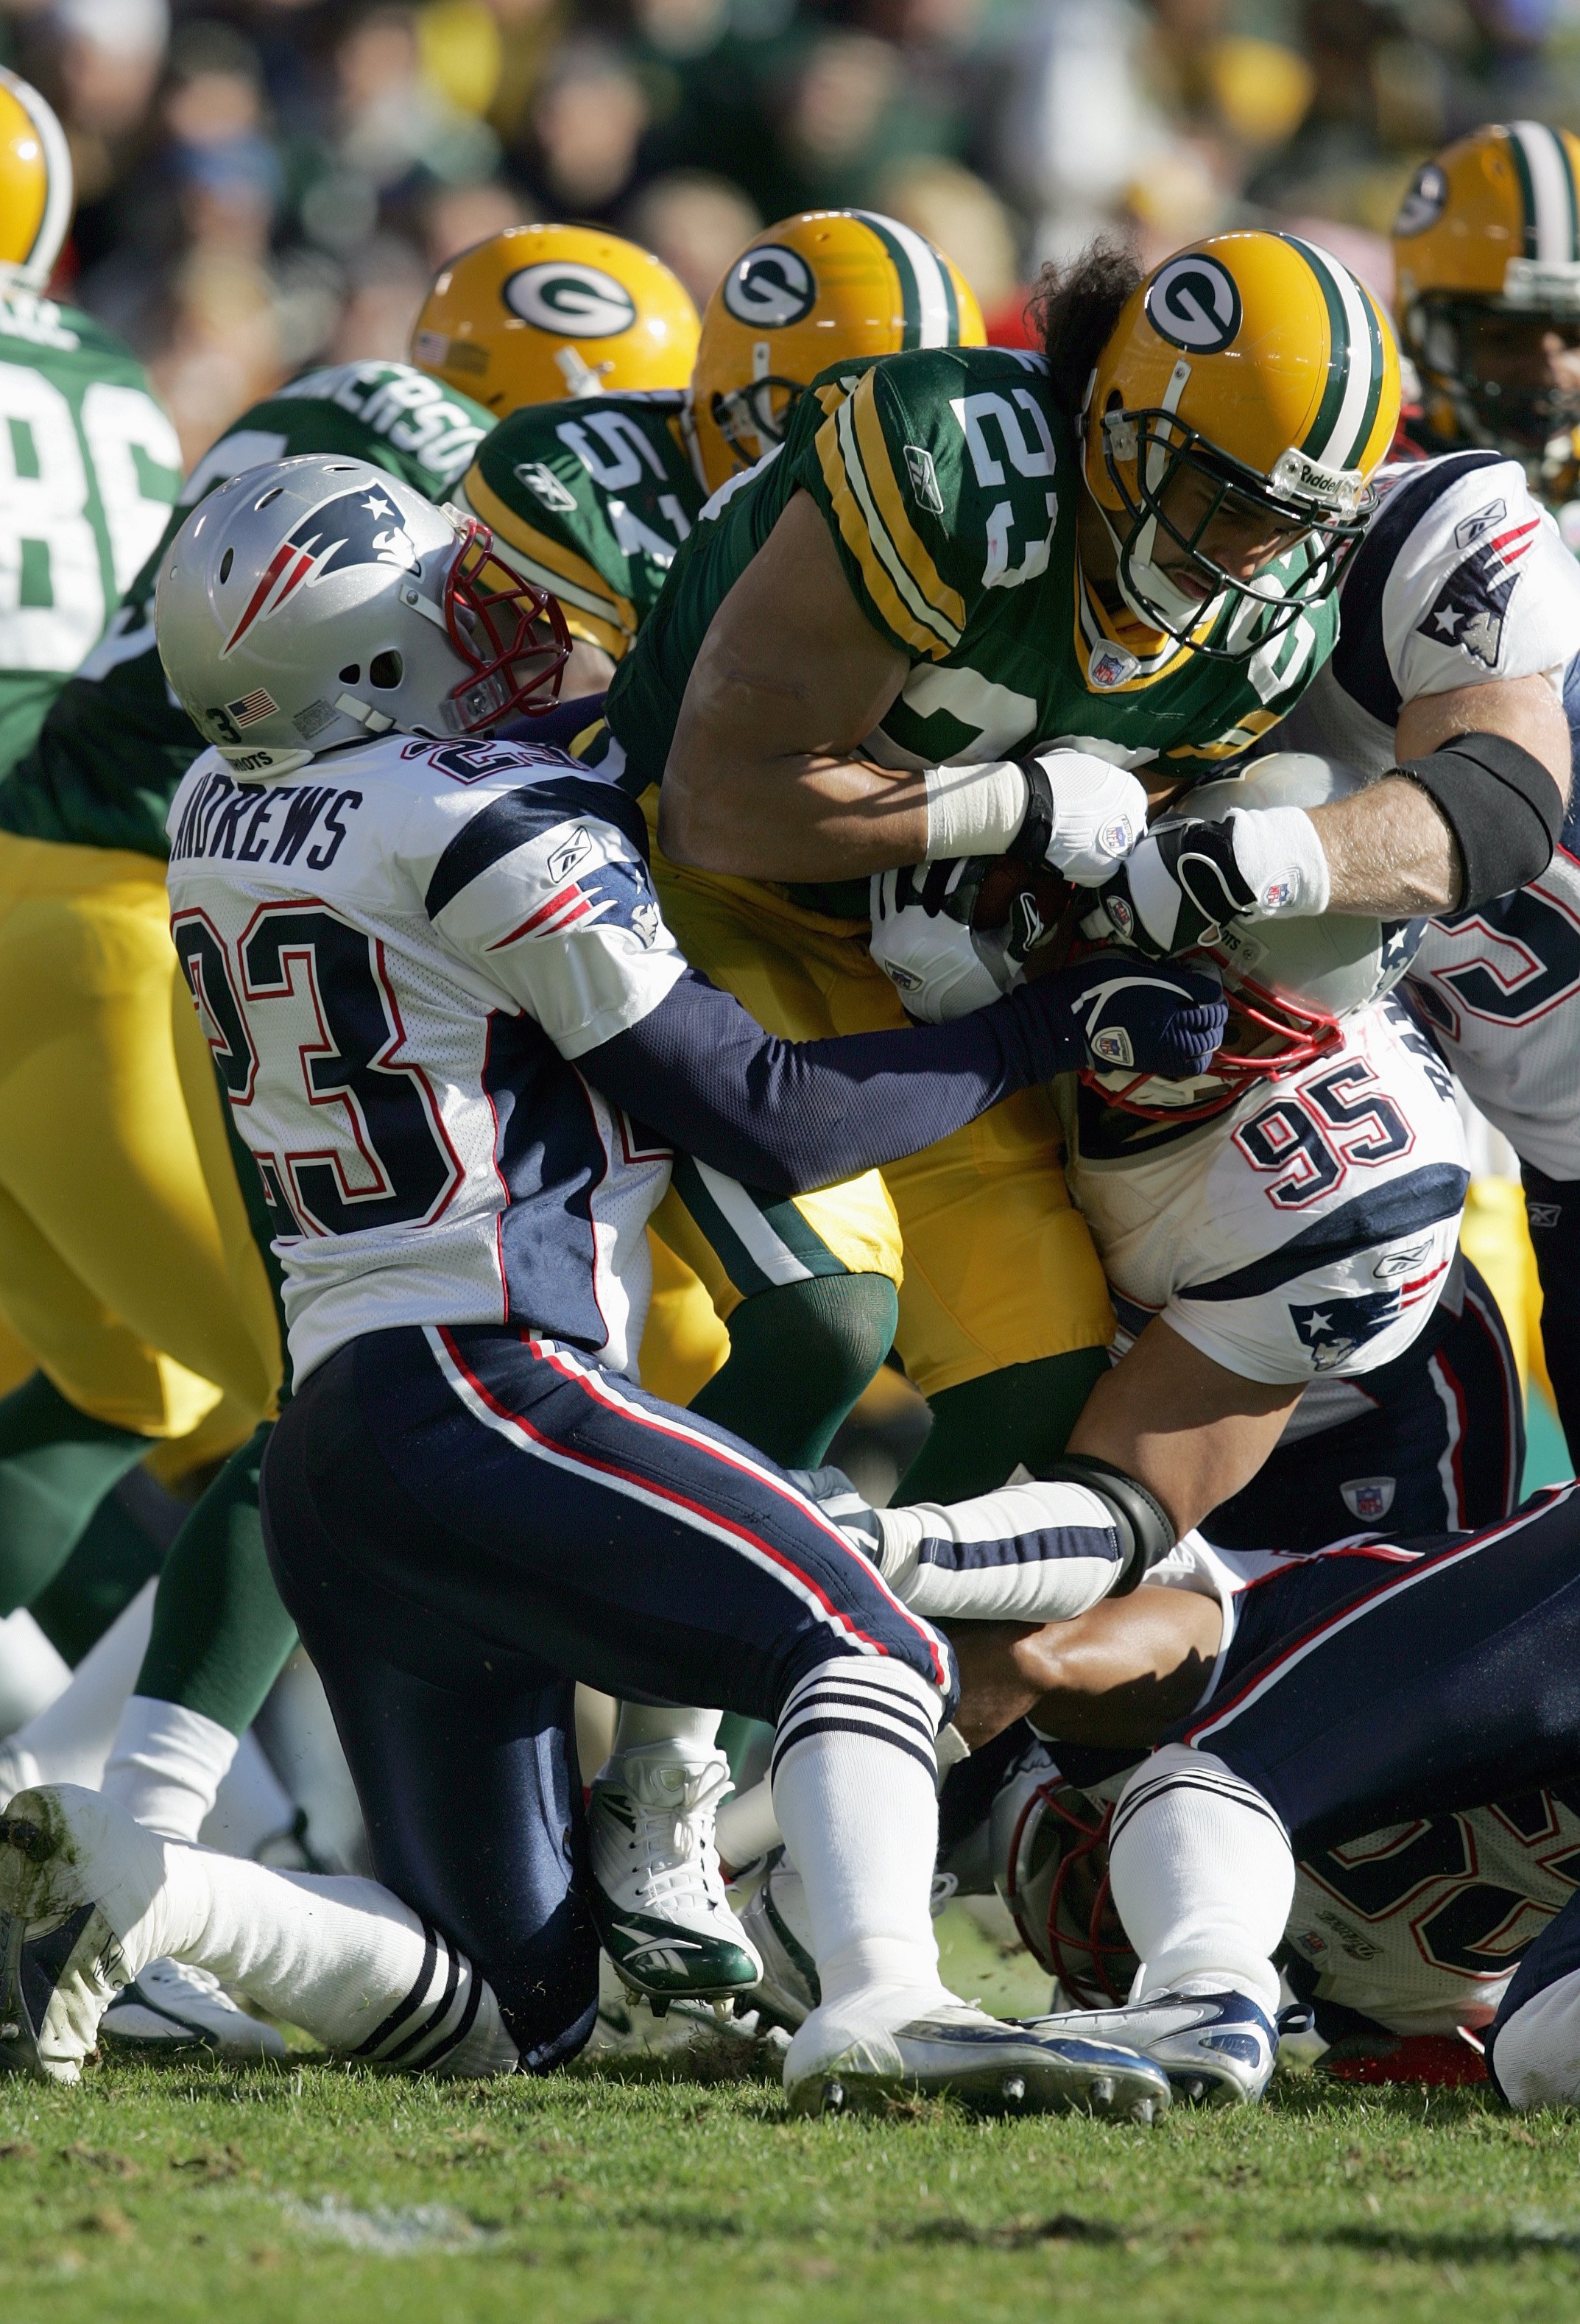 GREEN BAY, WI - NOVEMBER 19:  Noah Herron #23 of the Green Bay Packers grips the ball as he is tackled by  Willie Andrews #23 and Tully Banta- Cain #95 of the New England Patriots on November 19, 2006 at Lambeau Field in Green Bay, Wisconsin. The Patriots